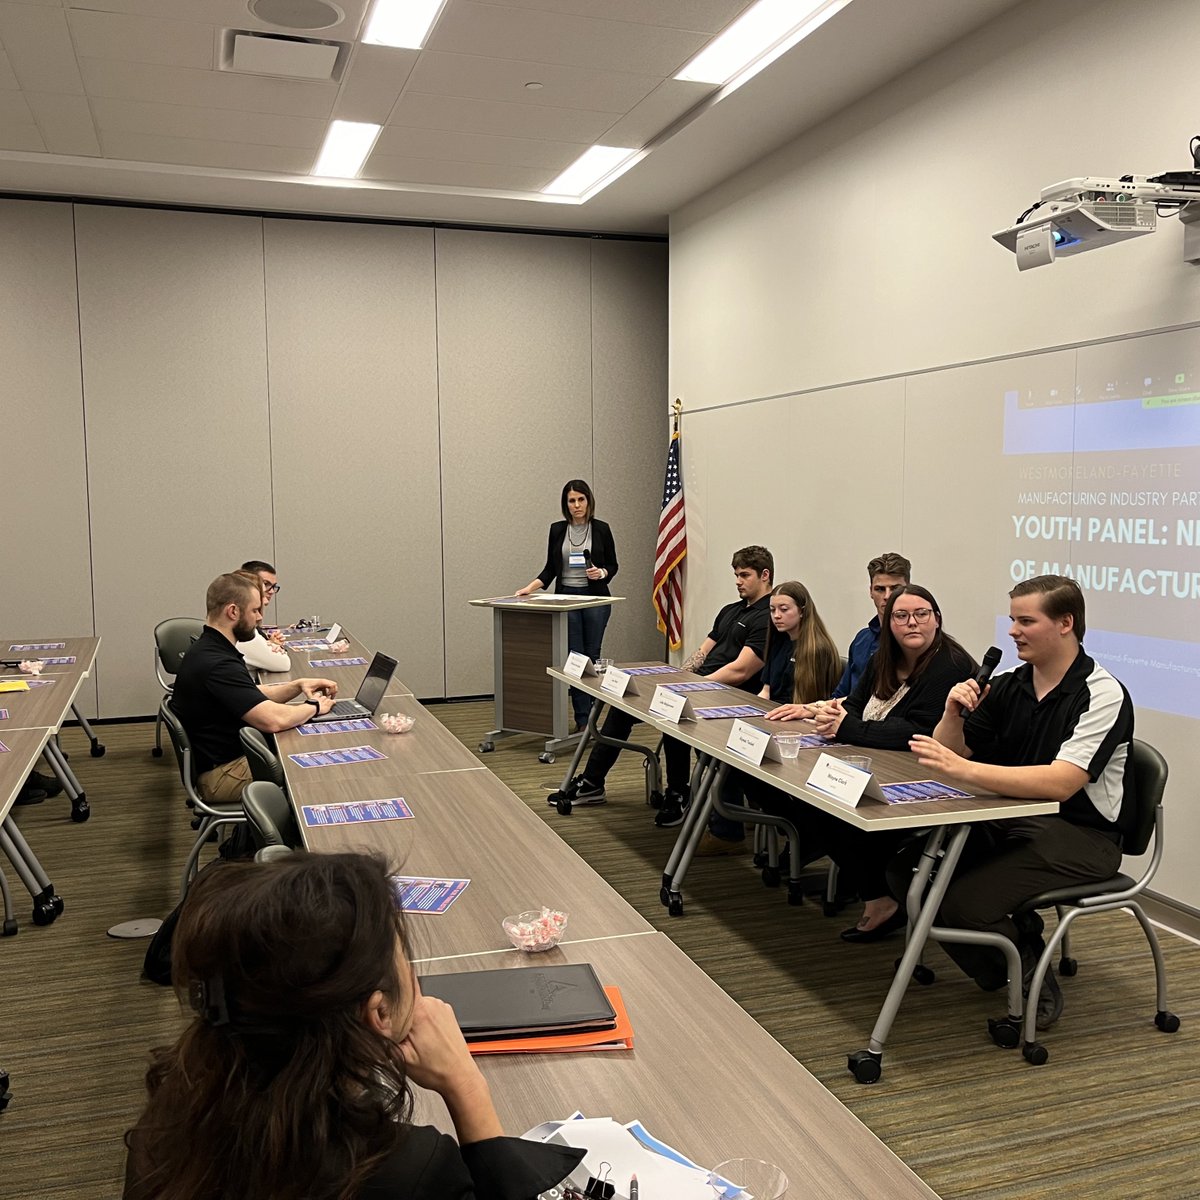 This week, the Manufacturing Industry Partnership hosted a panel of five young adults working in manufacturing to share their experiences, what motivated their decisions, and what employers can do to attract the future workforce. Thank you to our panelists and all who joined us!